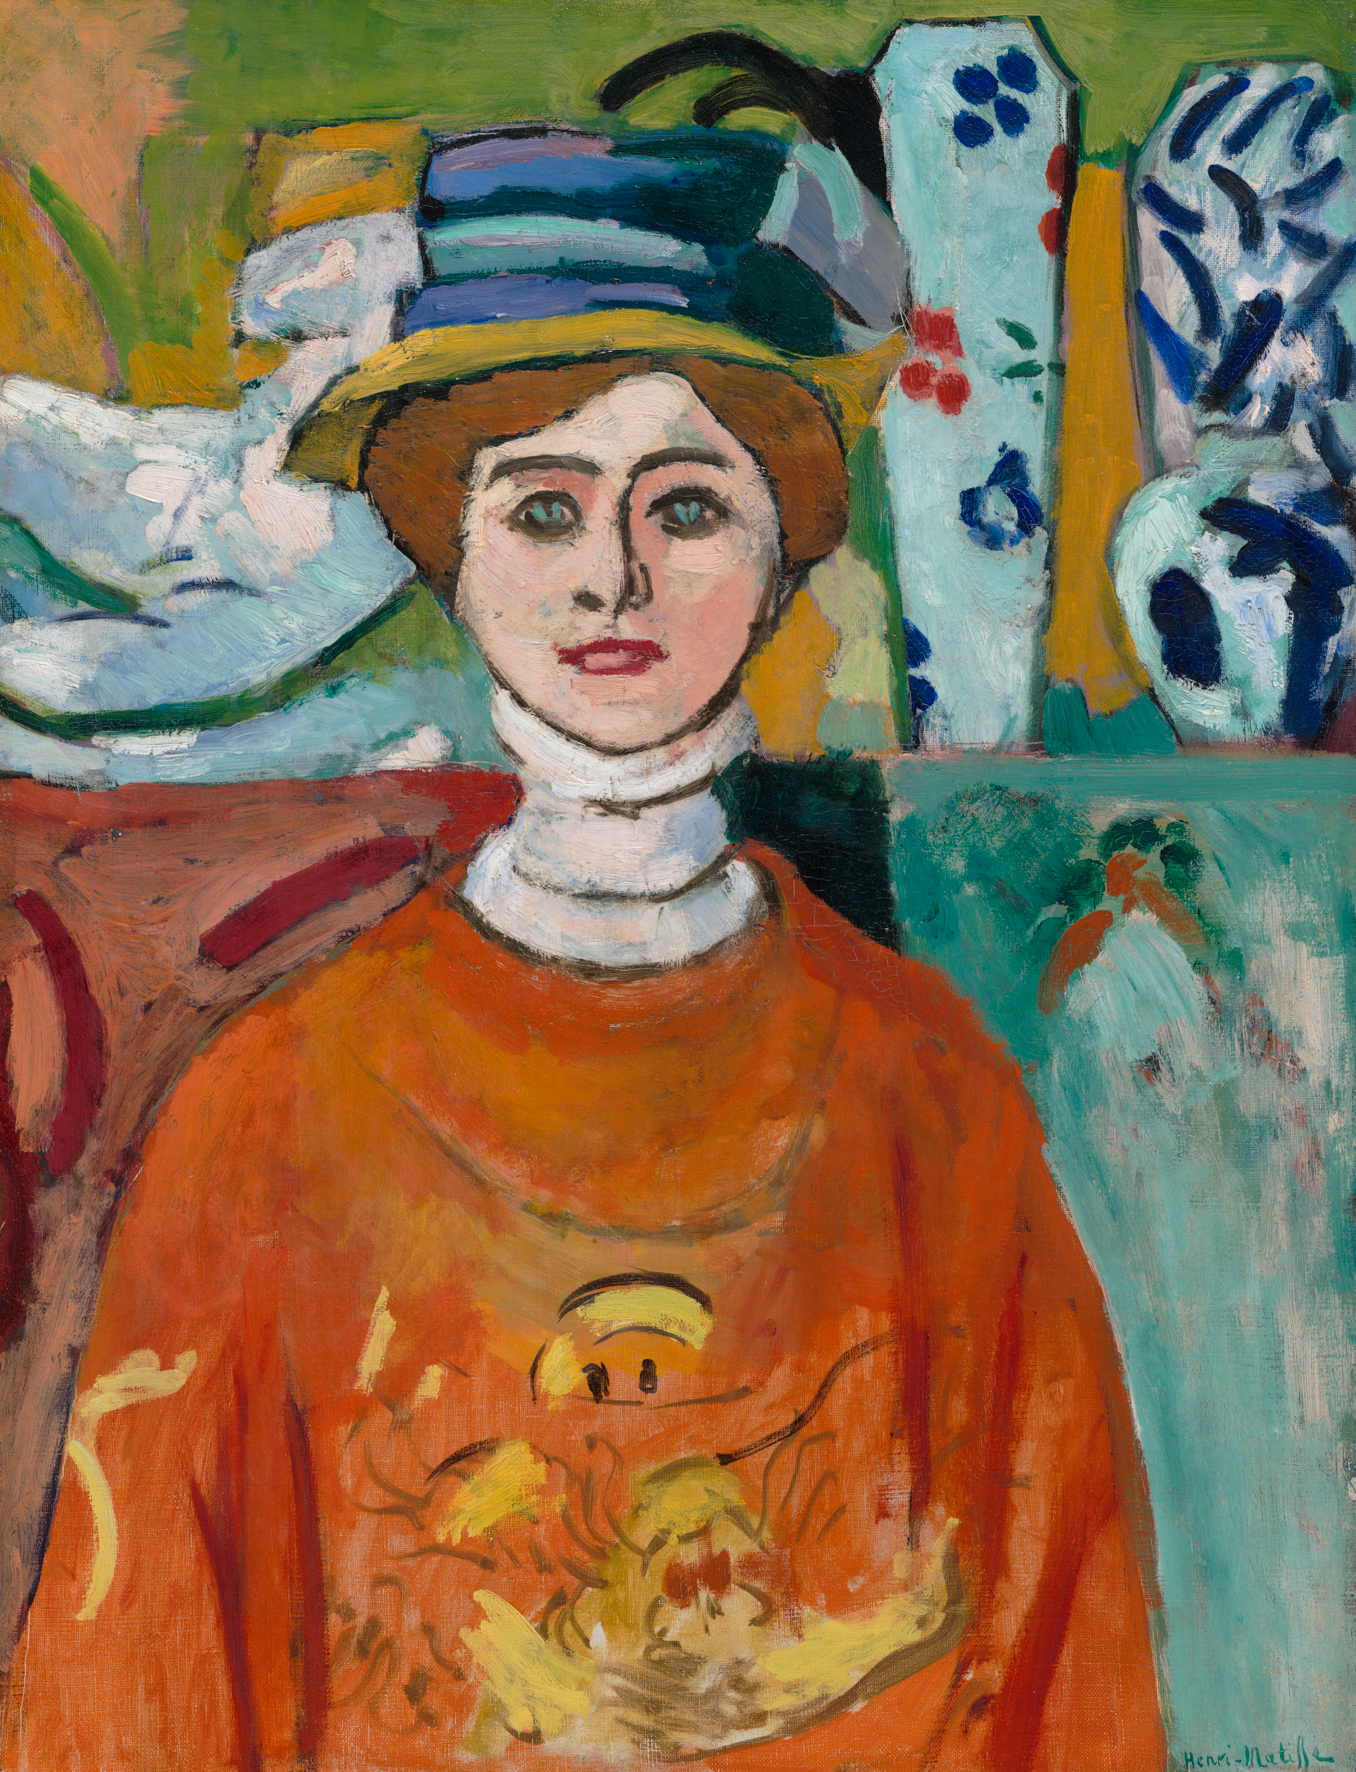 Painting by Henri Matisse, The Girl with Green Eyes (1908)